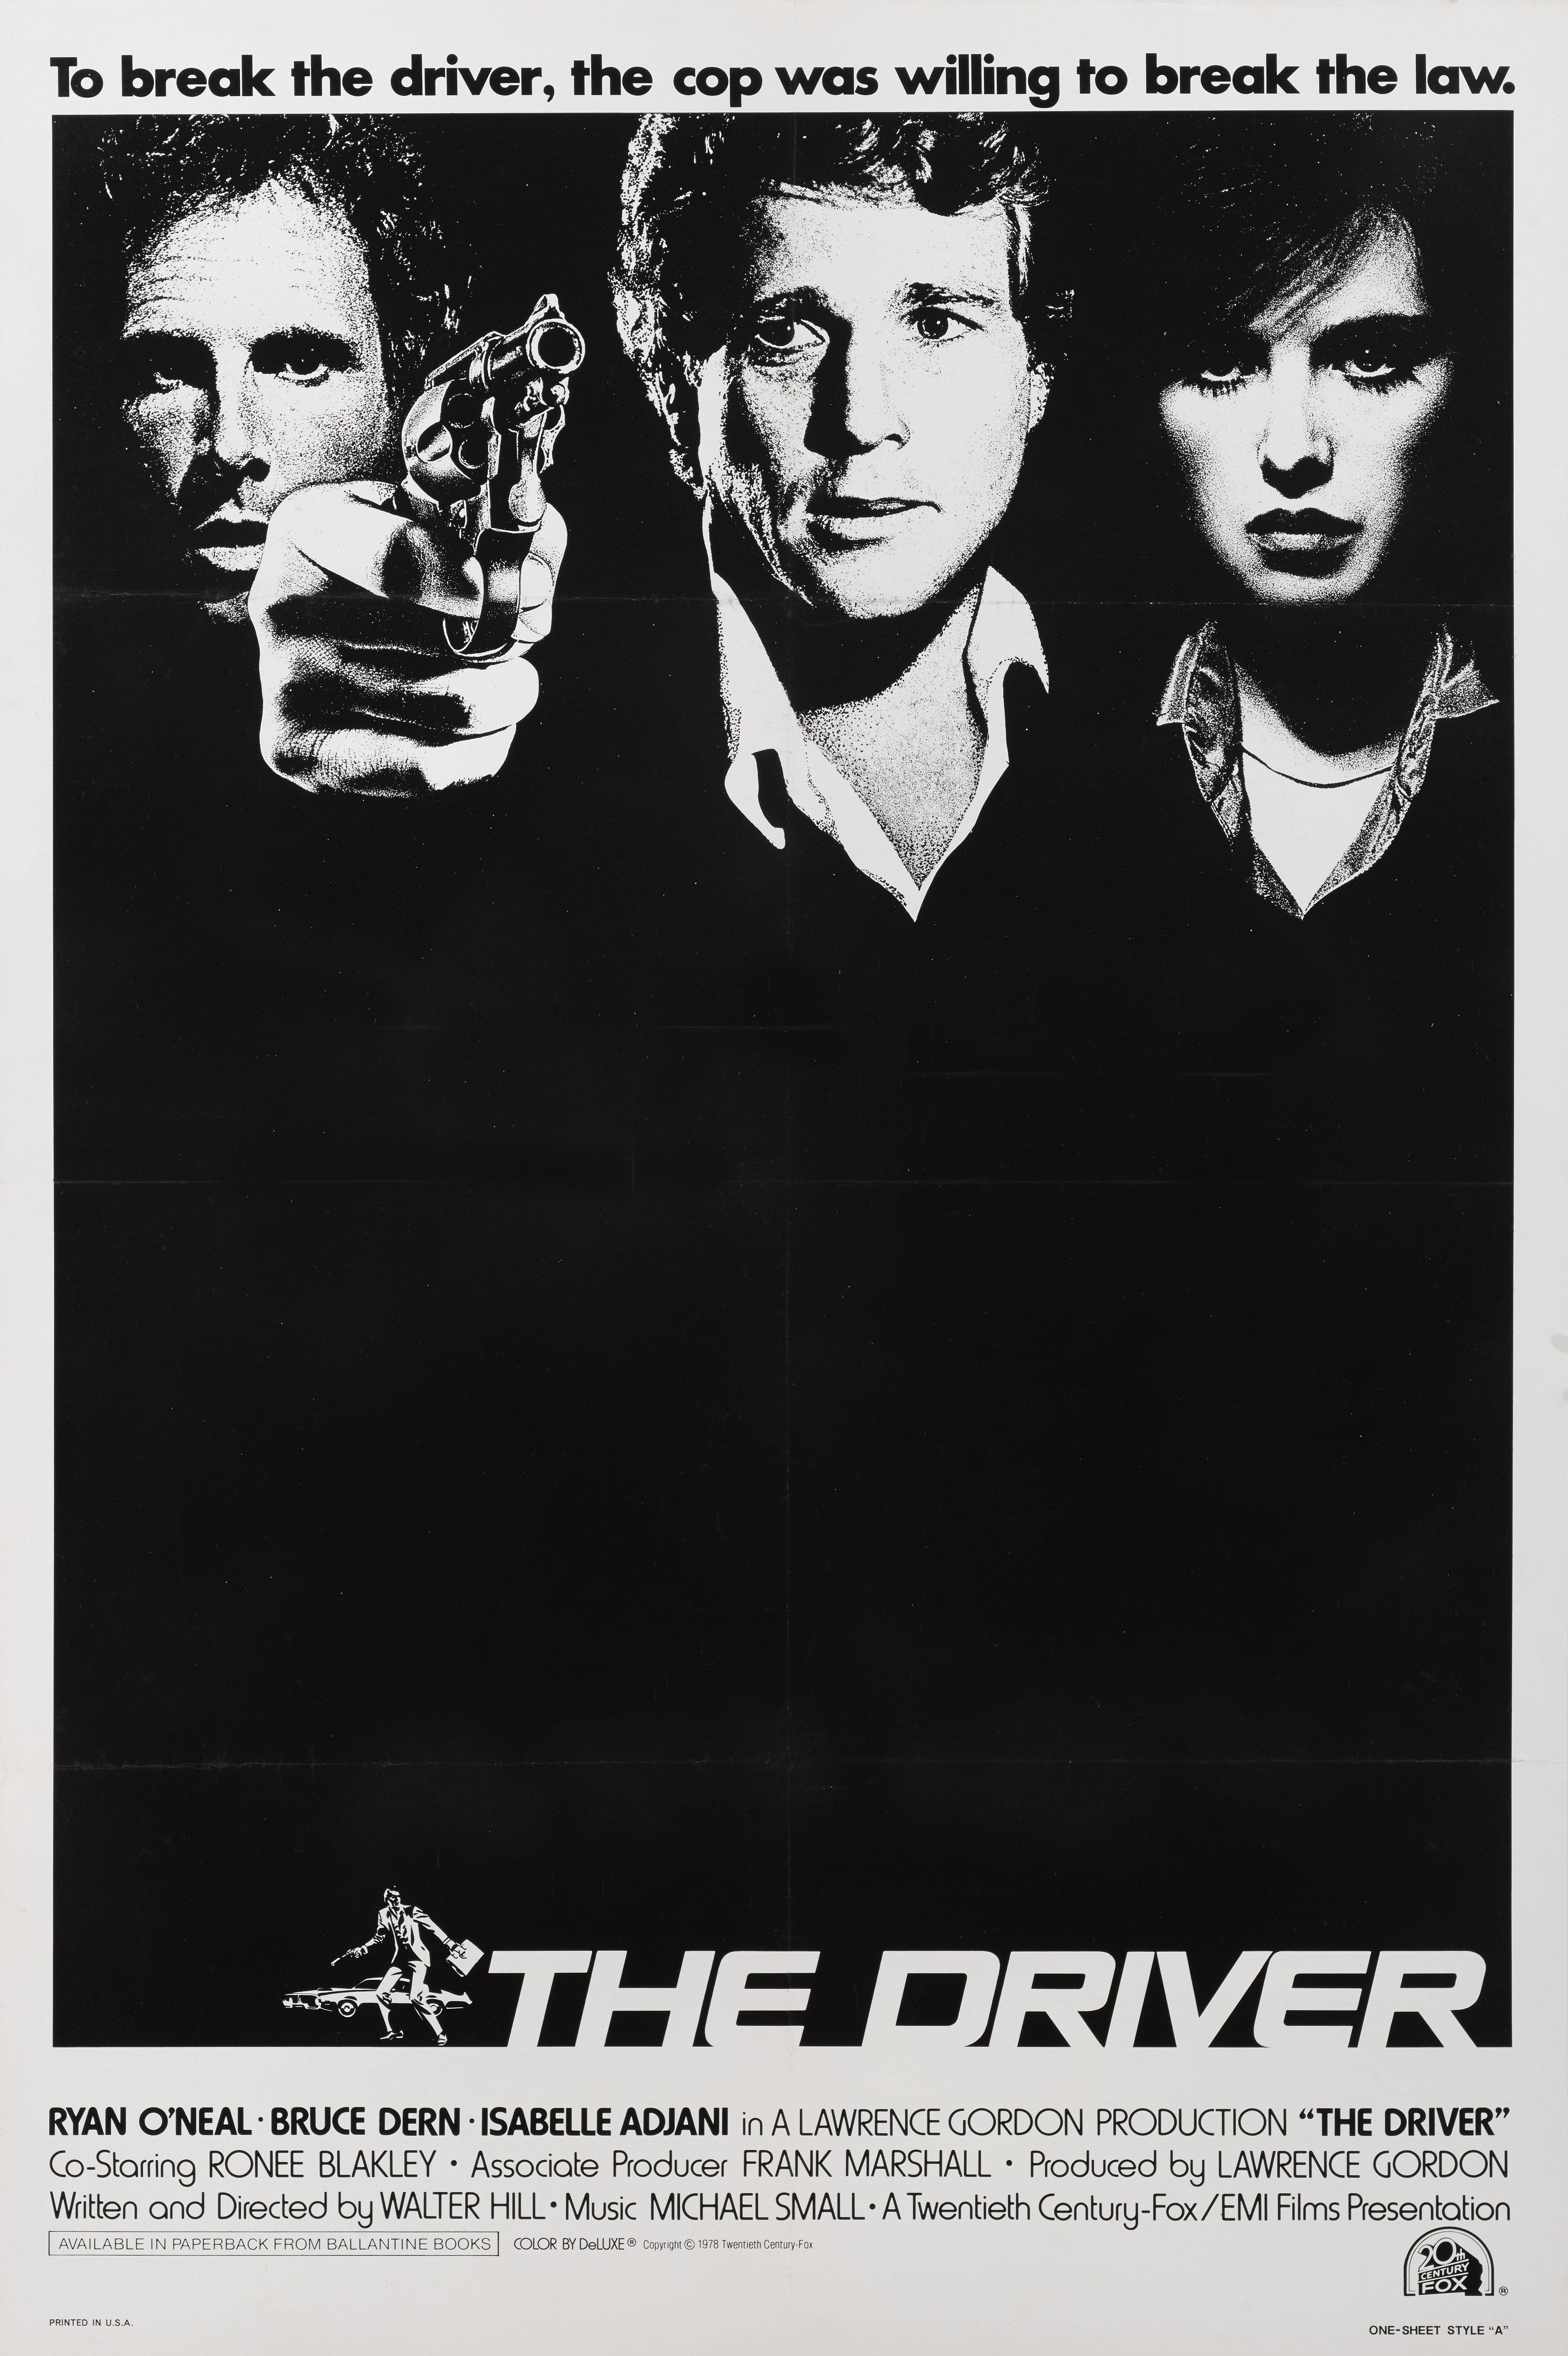 Original US film poster for the 1978 action thriller The Driver.
This is the US International style poster.
This film was directed by Walter Hill and starred Ryan O' Neal, Bruce Dern, Isabelle Adjani and Ronee Blakley
This piece is conservation